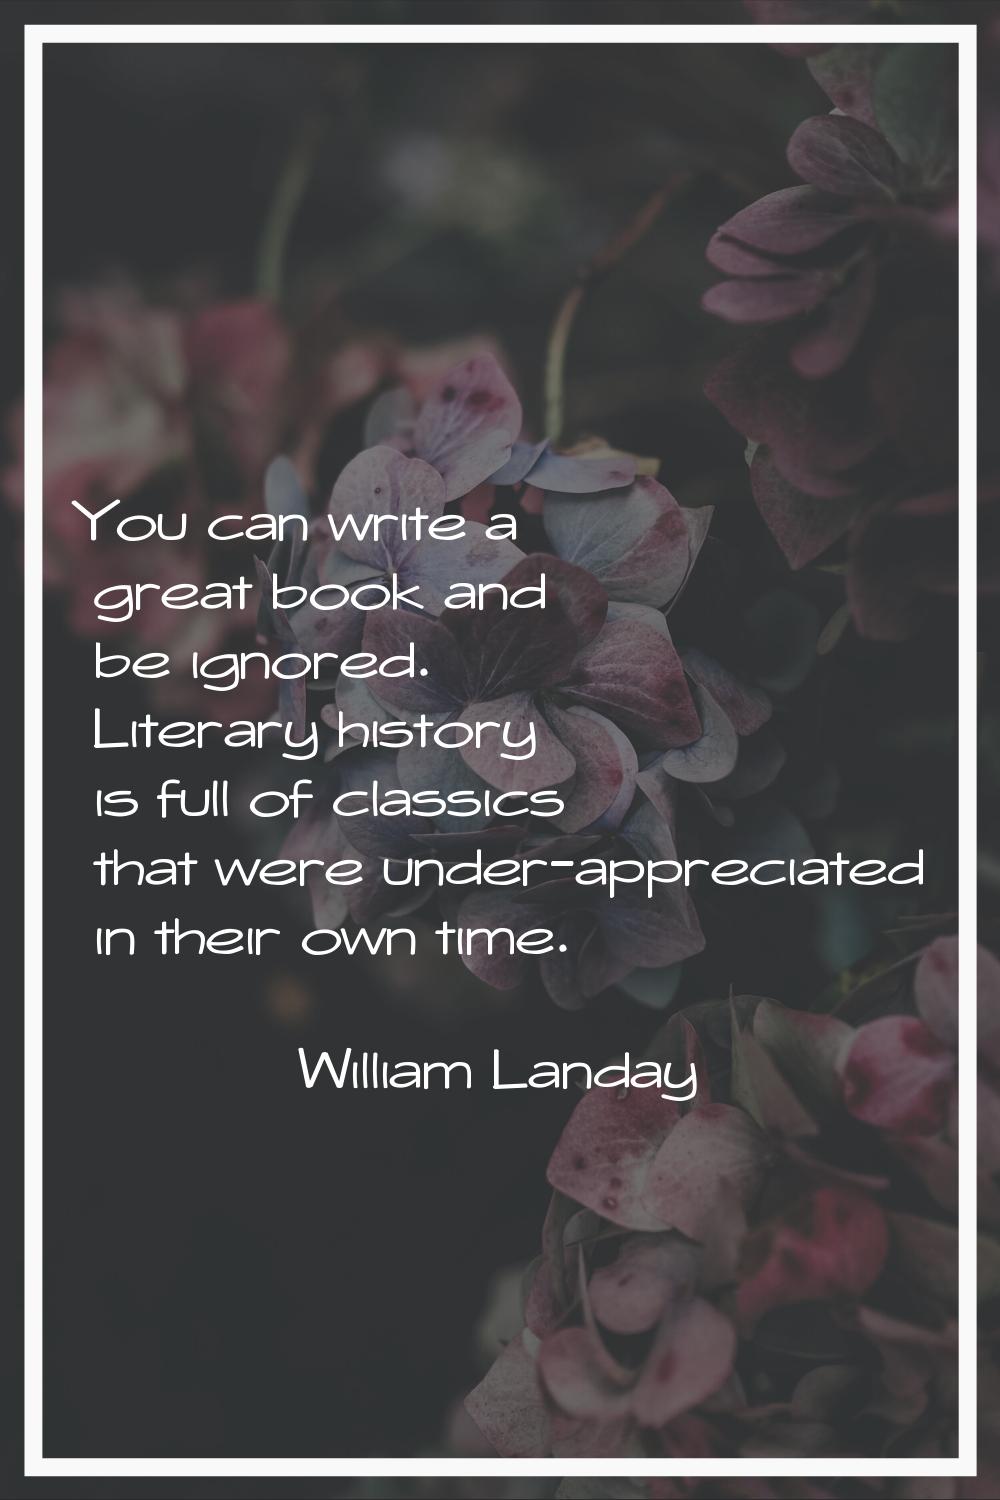 You can write a great book and be ignored. Literary history is full of classics that were under-app